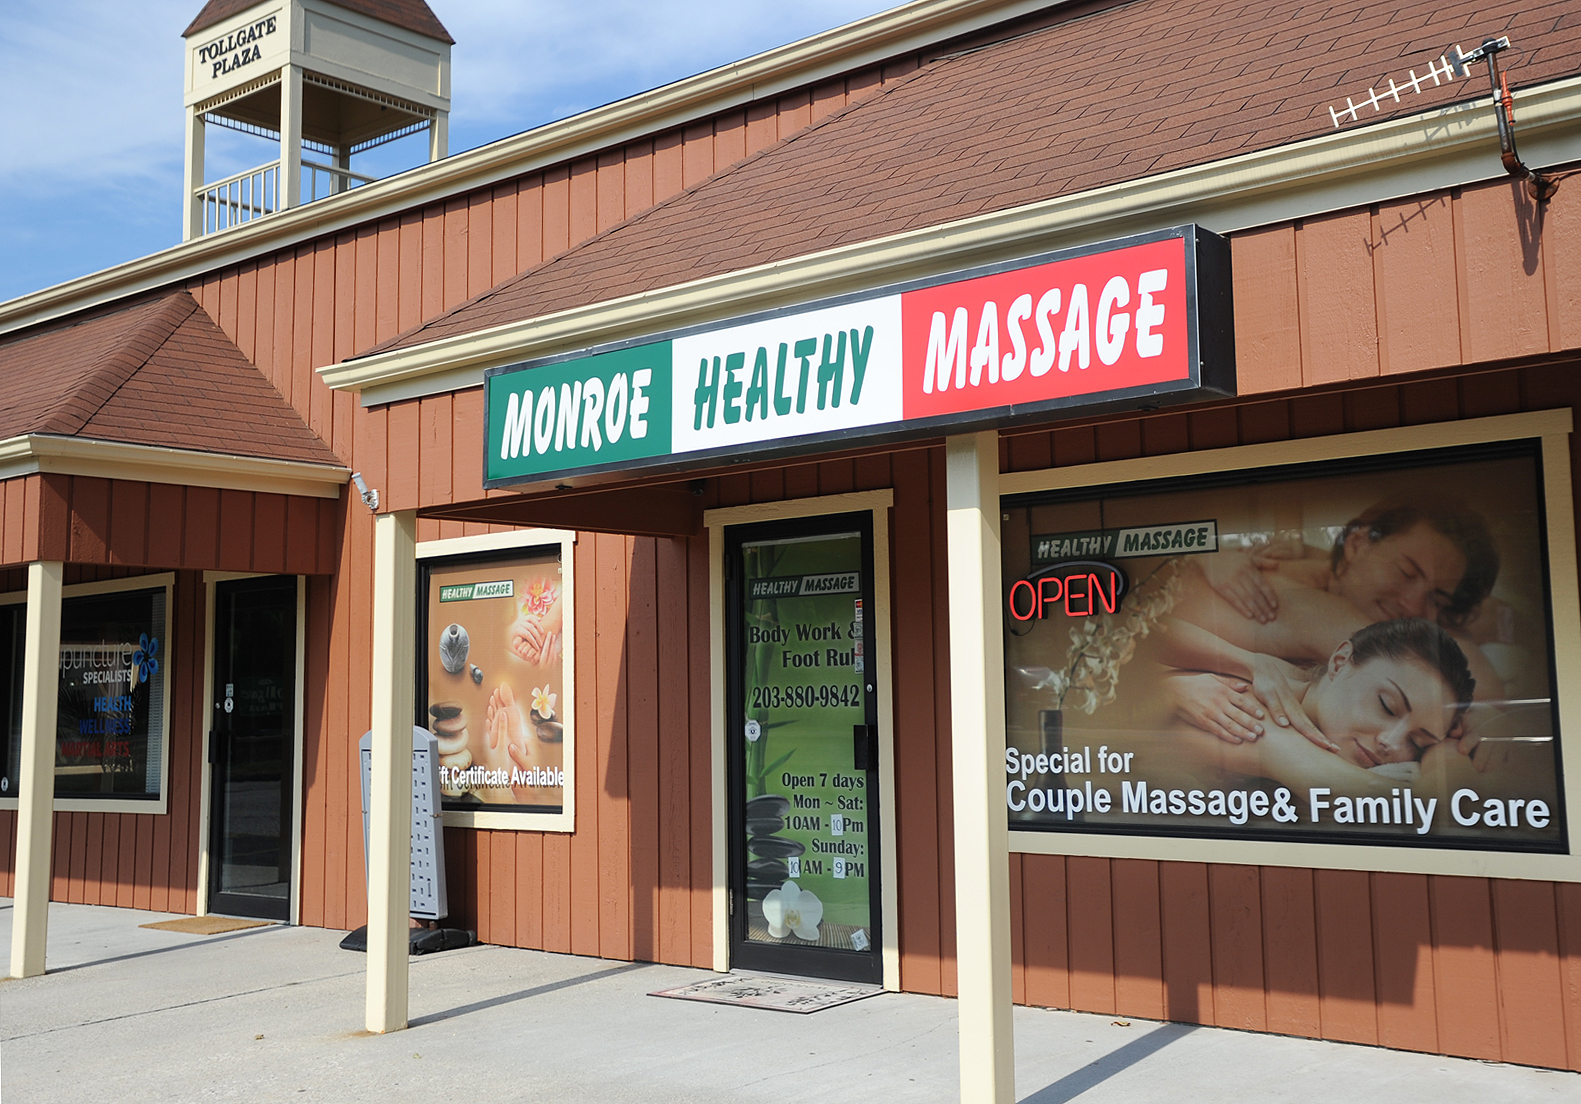 Massage parlor rubs Monroe residents the wrong photo pic